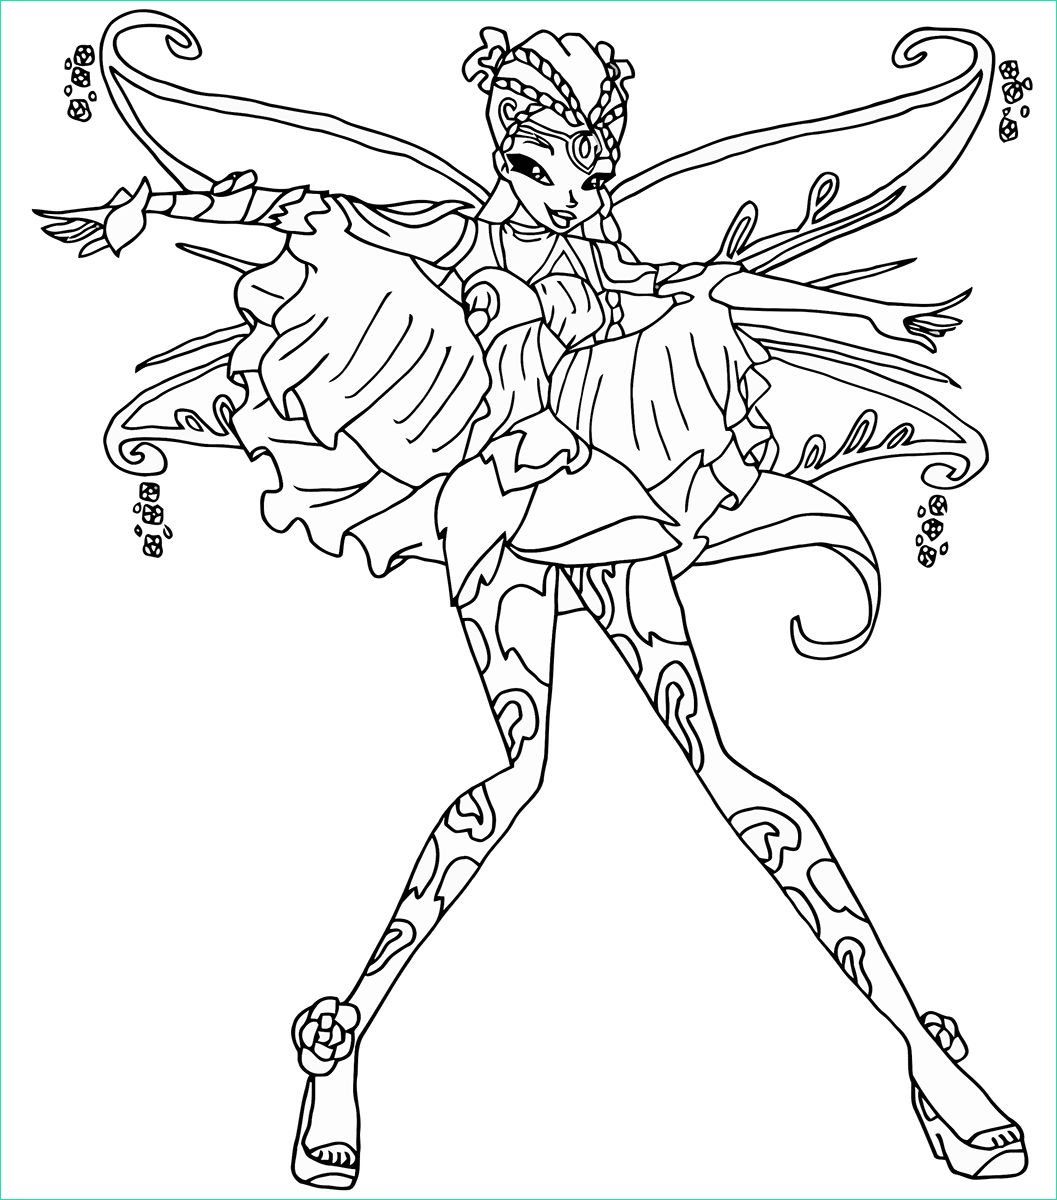 Coloriage Winx à Imprimer Luxe Collection Winx Club Bloomix Coloring Pages to and Print for